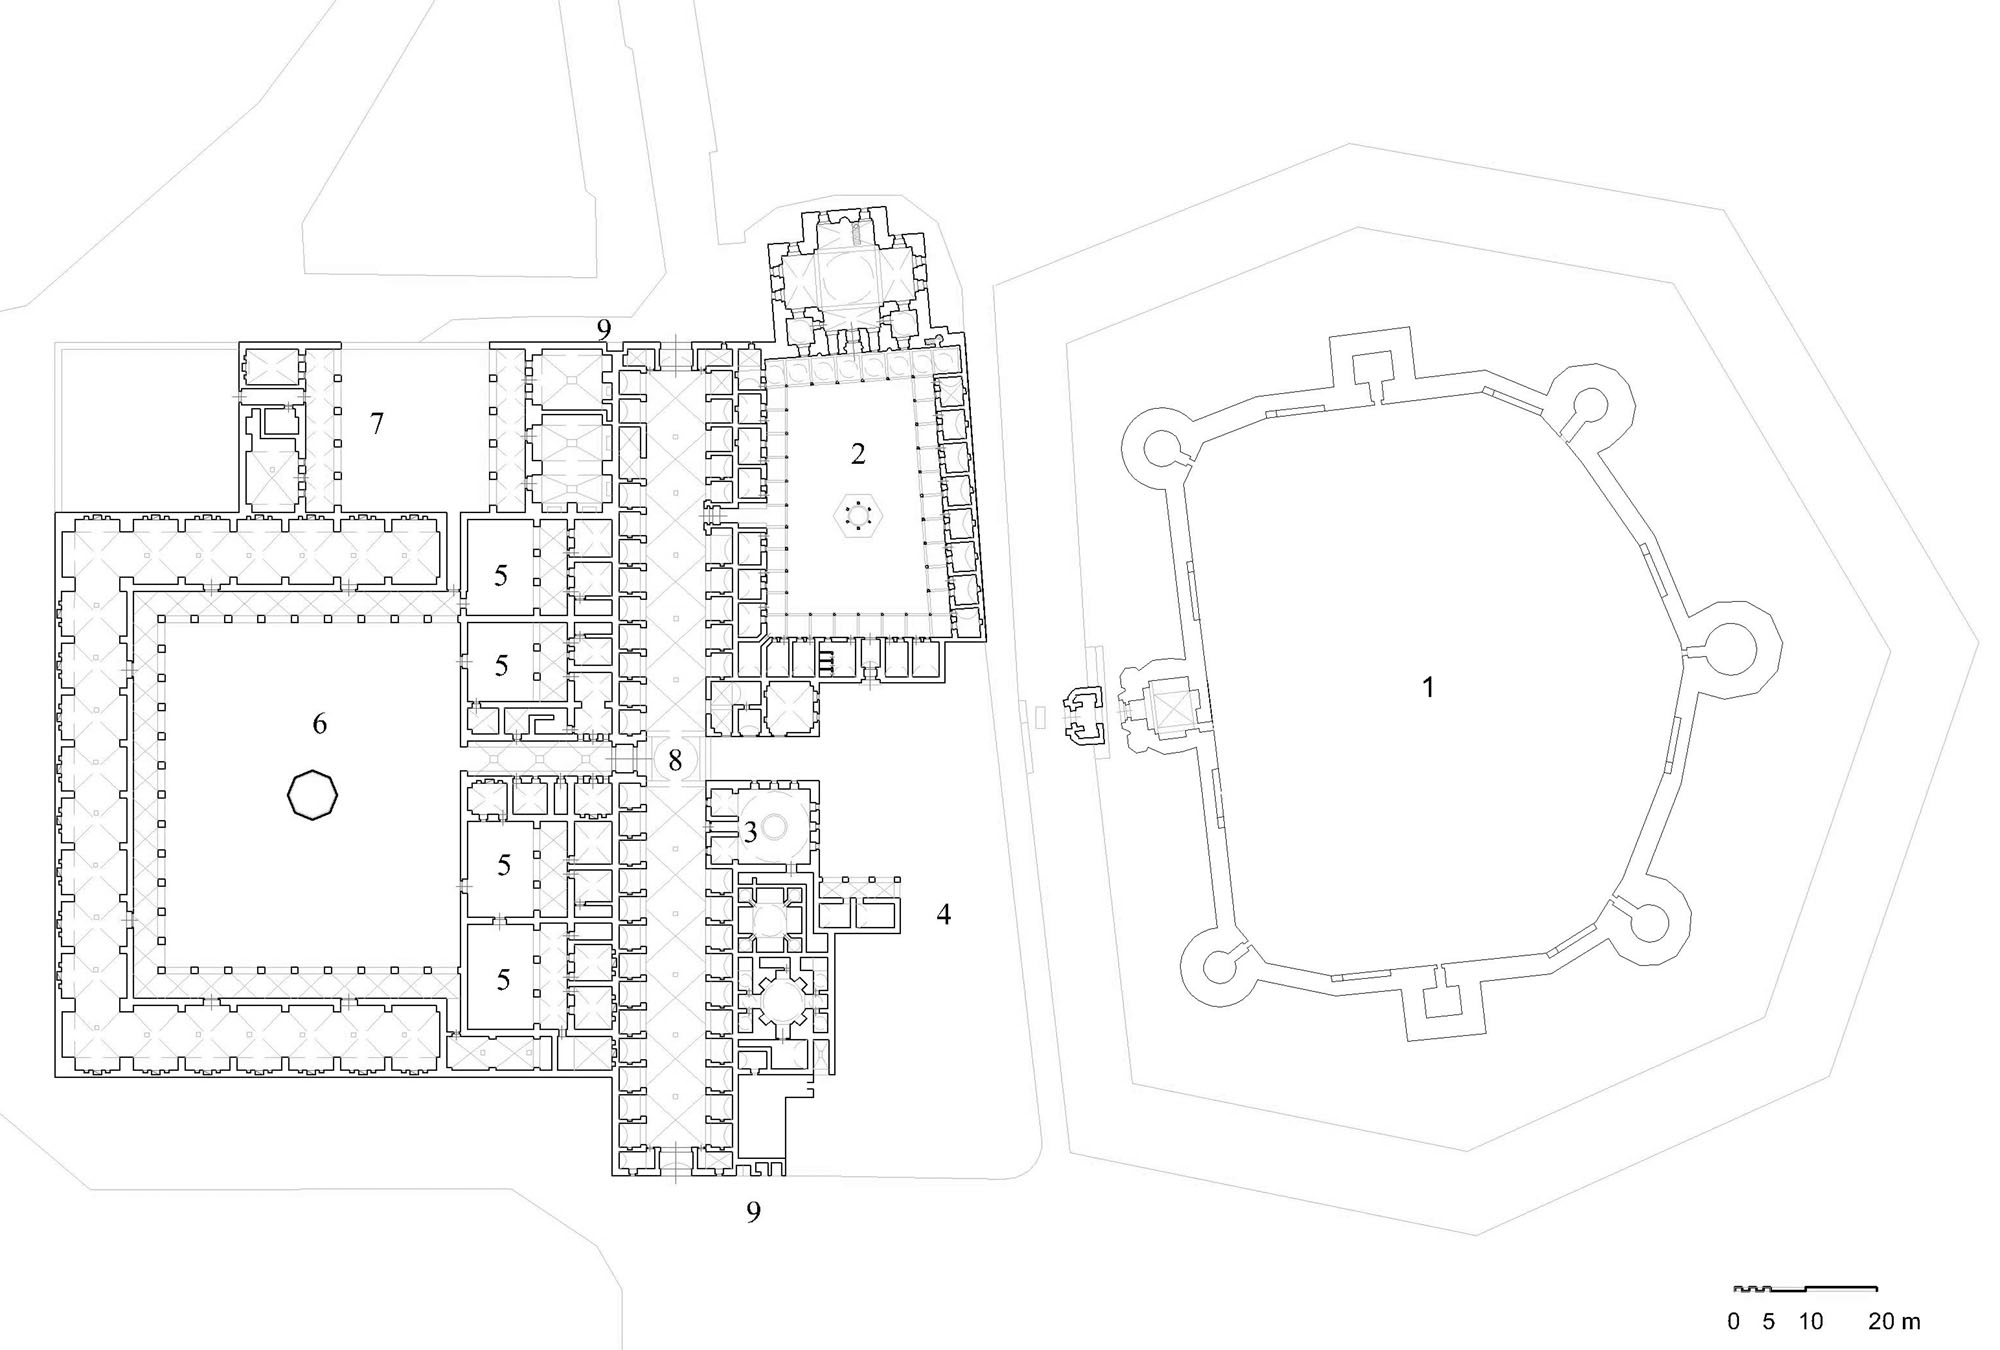 Sokollu Mehmed Pasha Külliyesi - Floor plan of complex showing (1) fortress, (2) mosque and convent courtyard, (3) bathhouse, (4) elementary school (hypothetical reconstruction), (5) guestrooms with private courts, (6) caravanserai with stables, (7) hospice, (8) prayer dome, (9) public fountains. DWG file in AutoCAD 2000 format. Click the download button to download a zipped file containing the .dwg file.